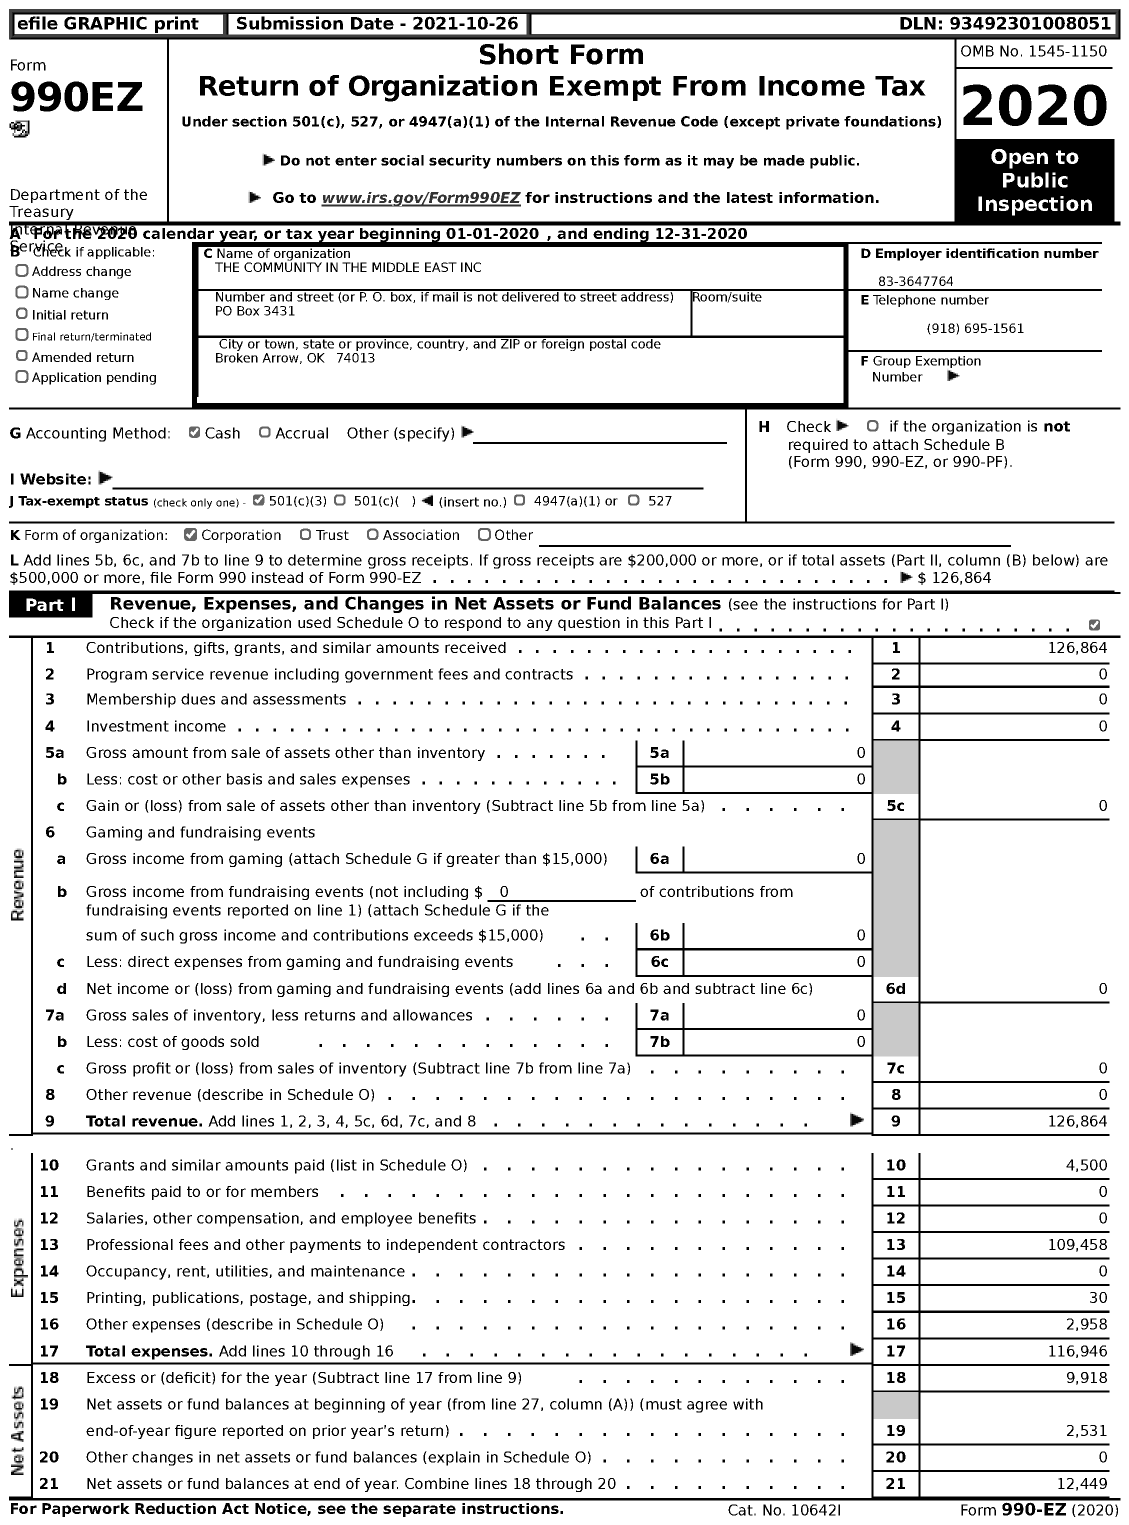 Image of first page of 2020 Form 990EZ for the Community in the Middle East